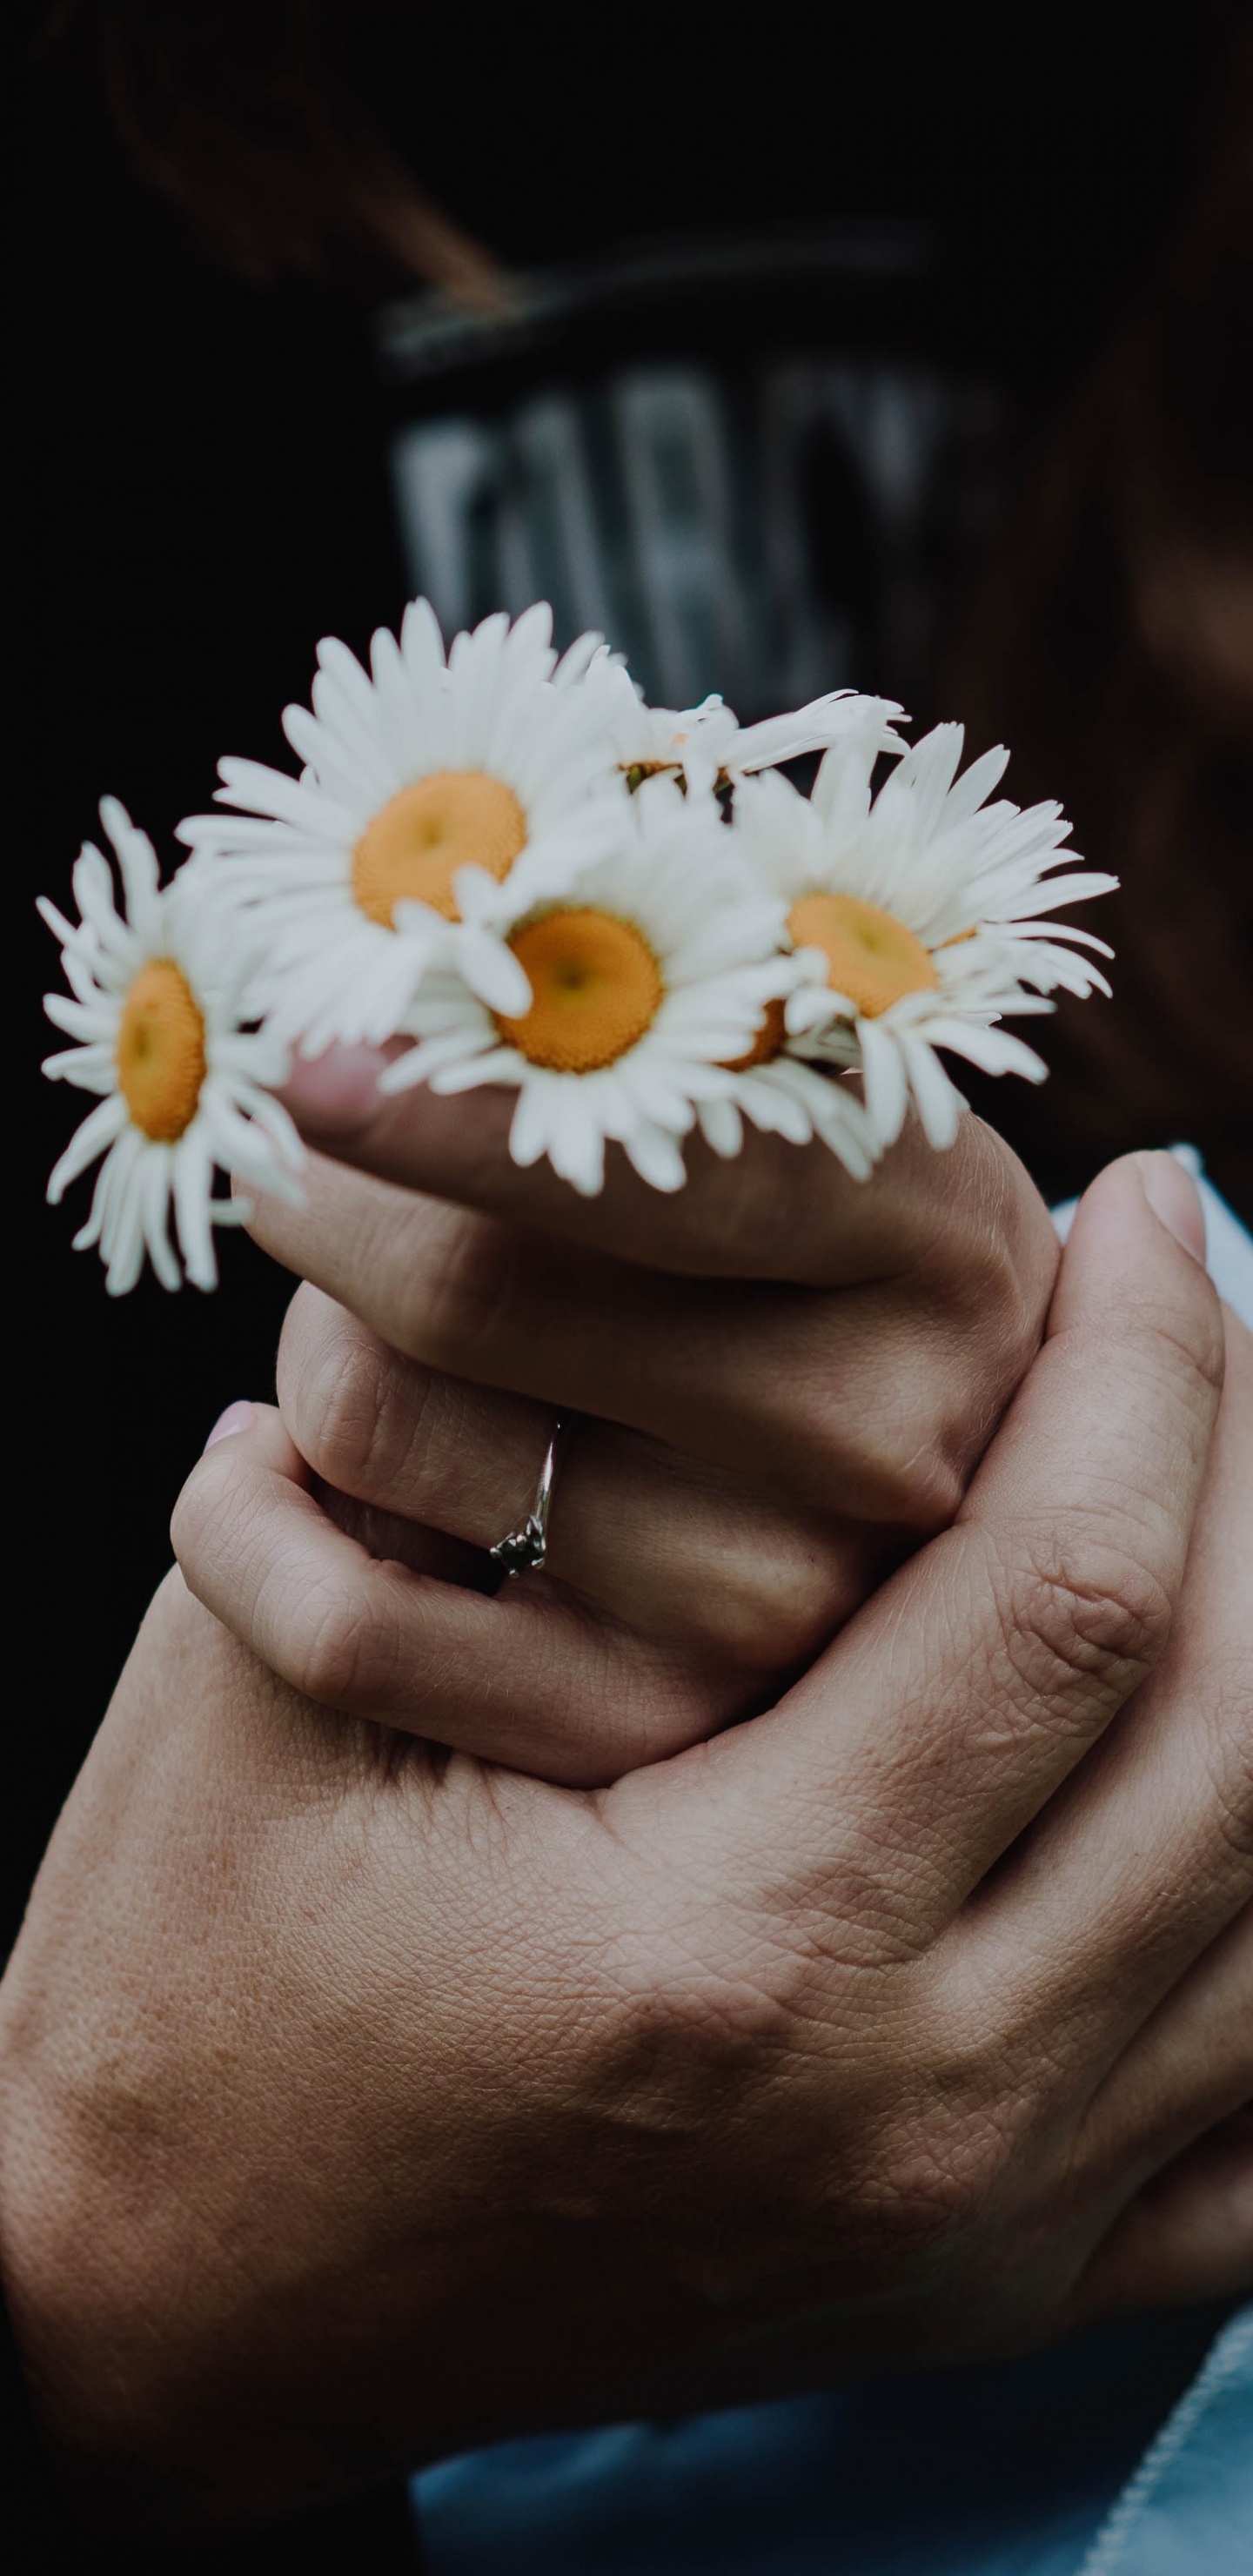 Person Holding White Daisy Flower. Wallpaper in 1440x2960 Resolution